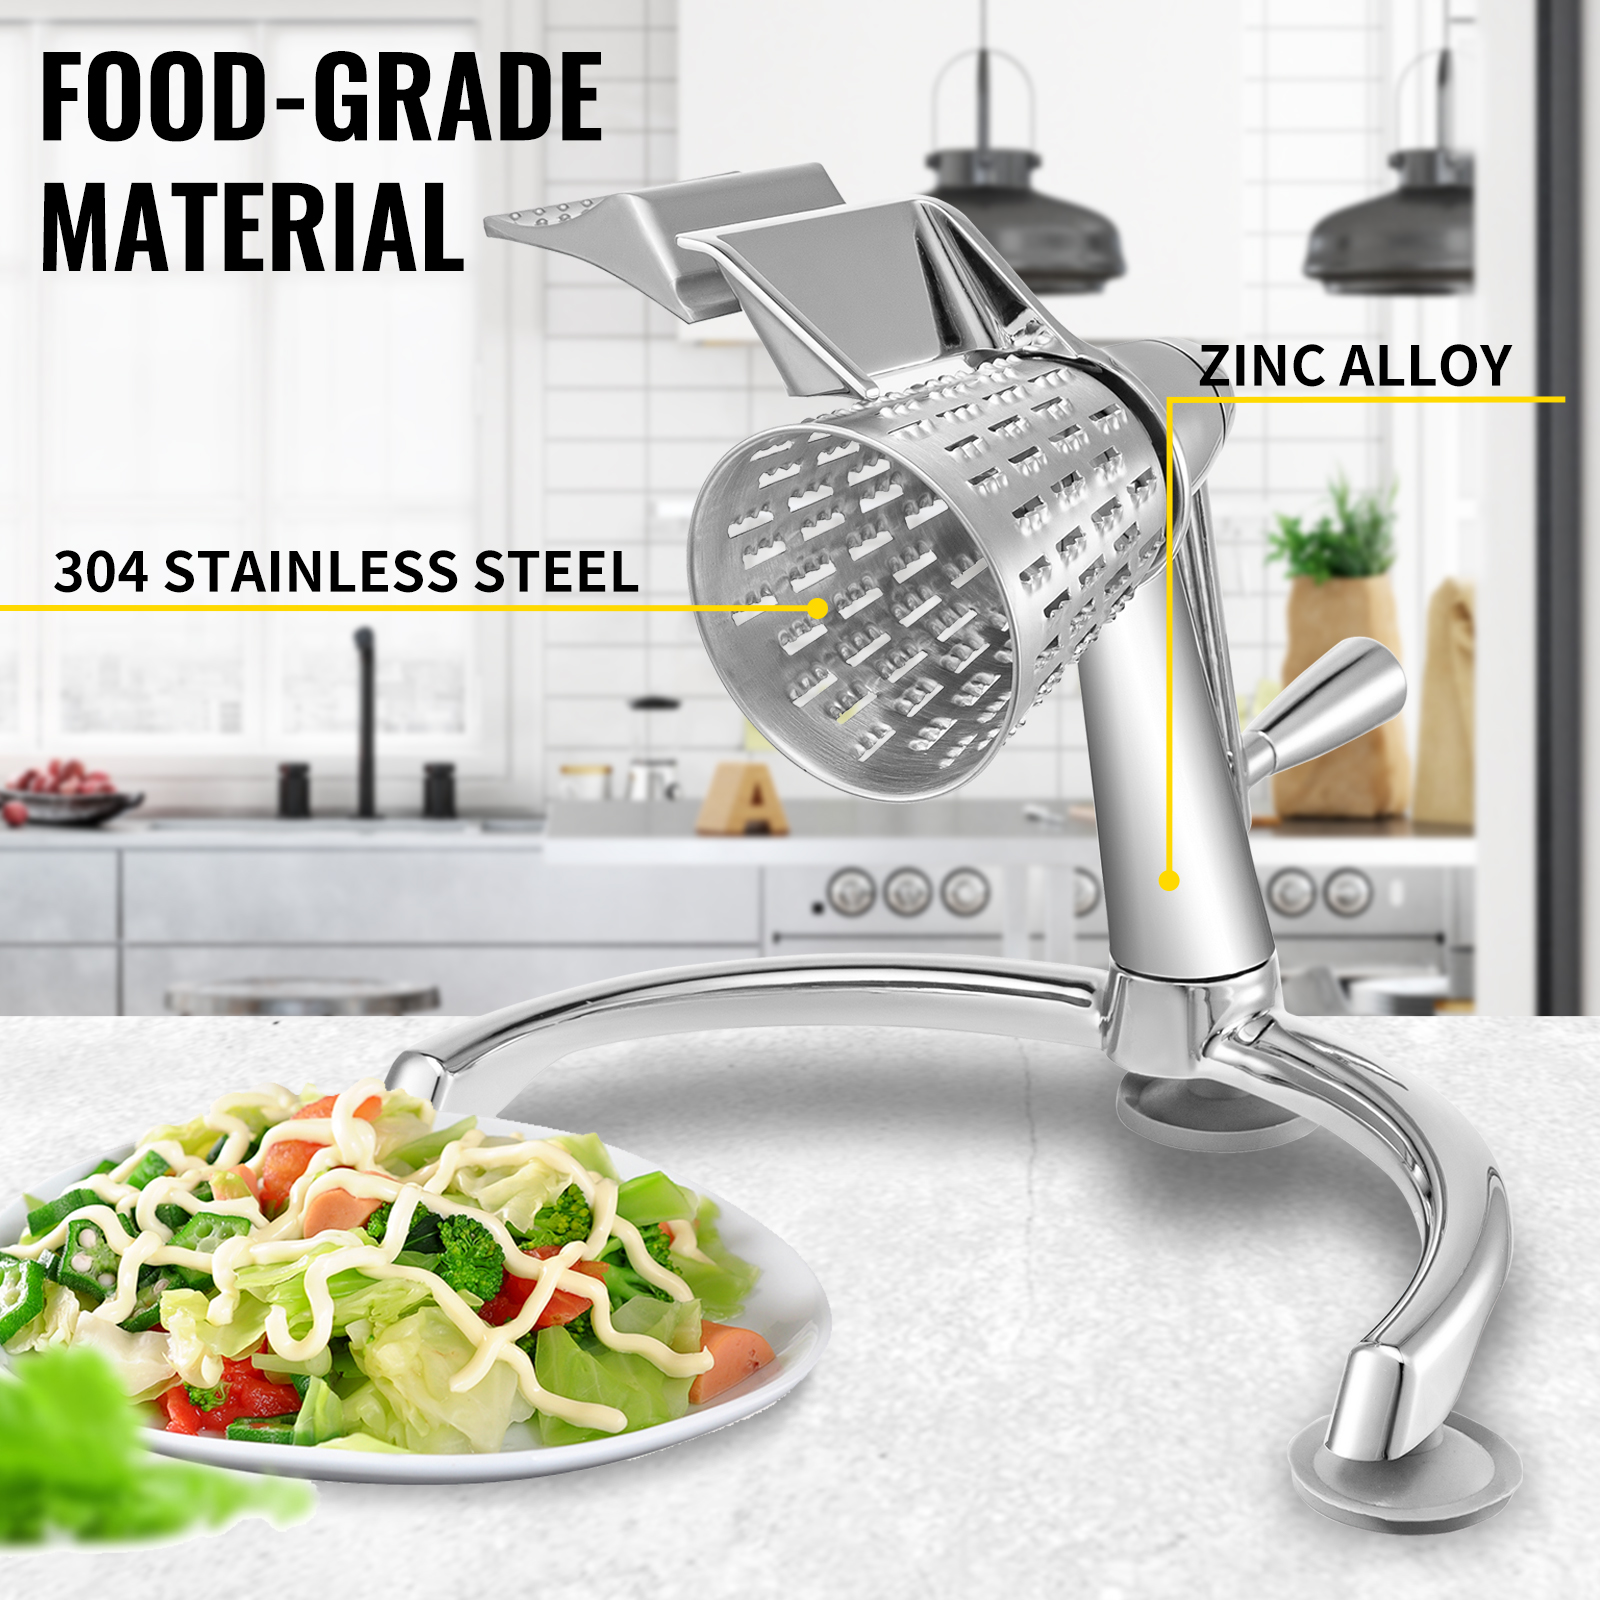 Easy-cheesy rotary grater and vegetable slicer with large bowl – your ultimate kitchen gadget for quick and efficient food preparation